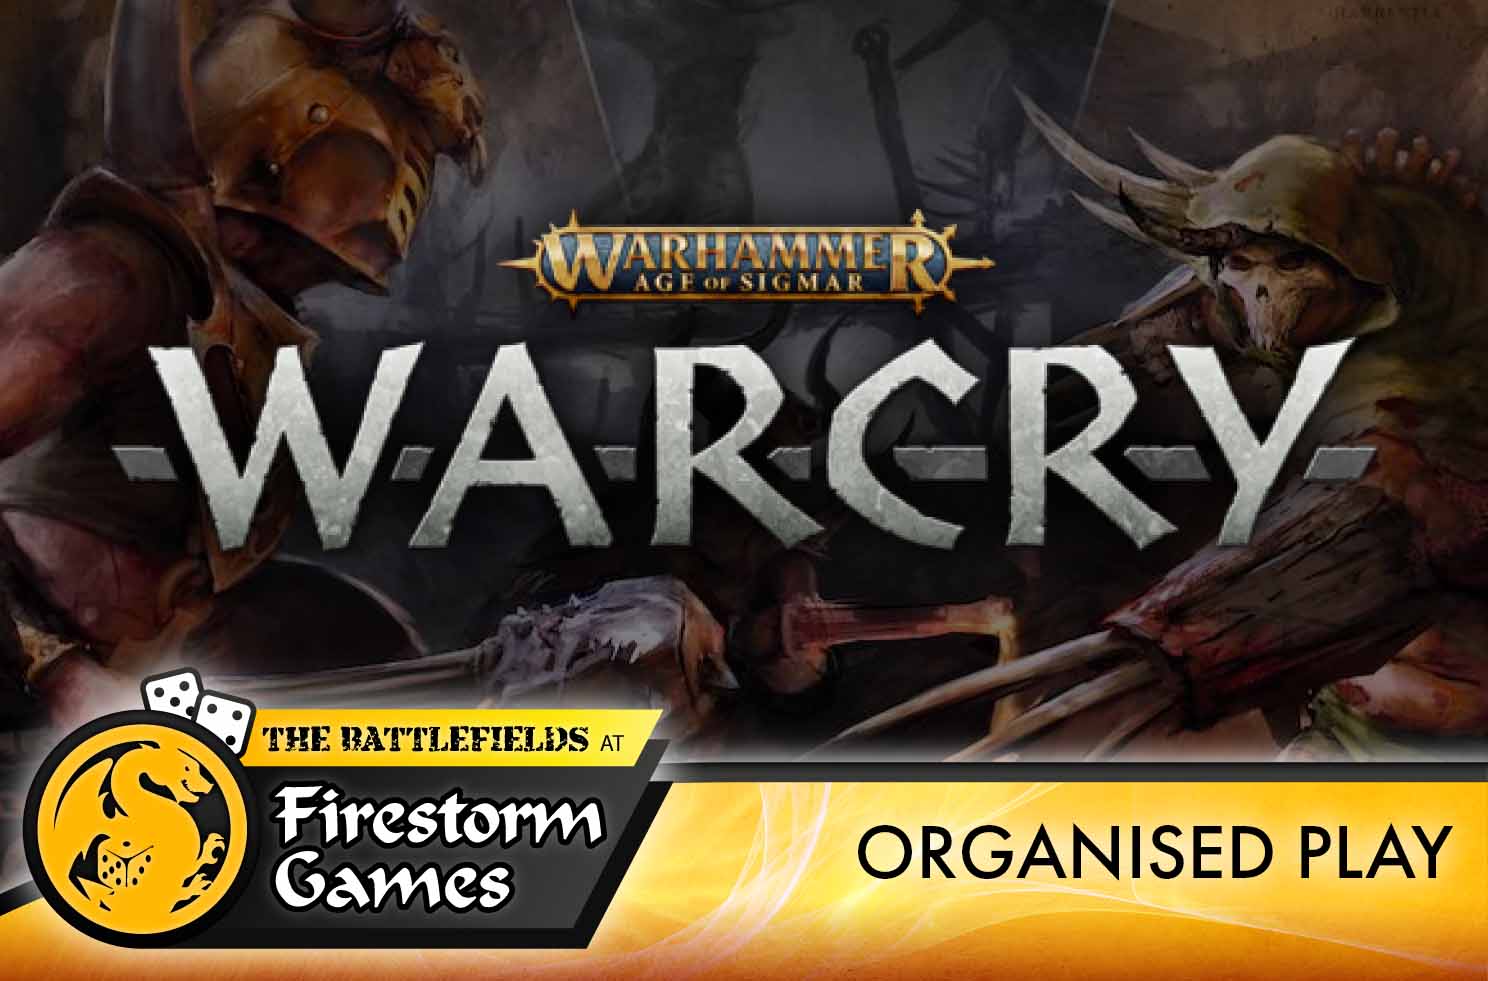 Warcry Meet and Play